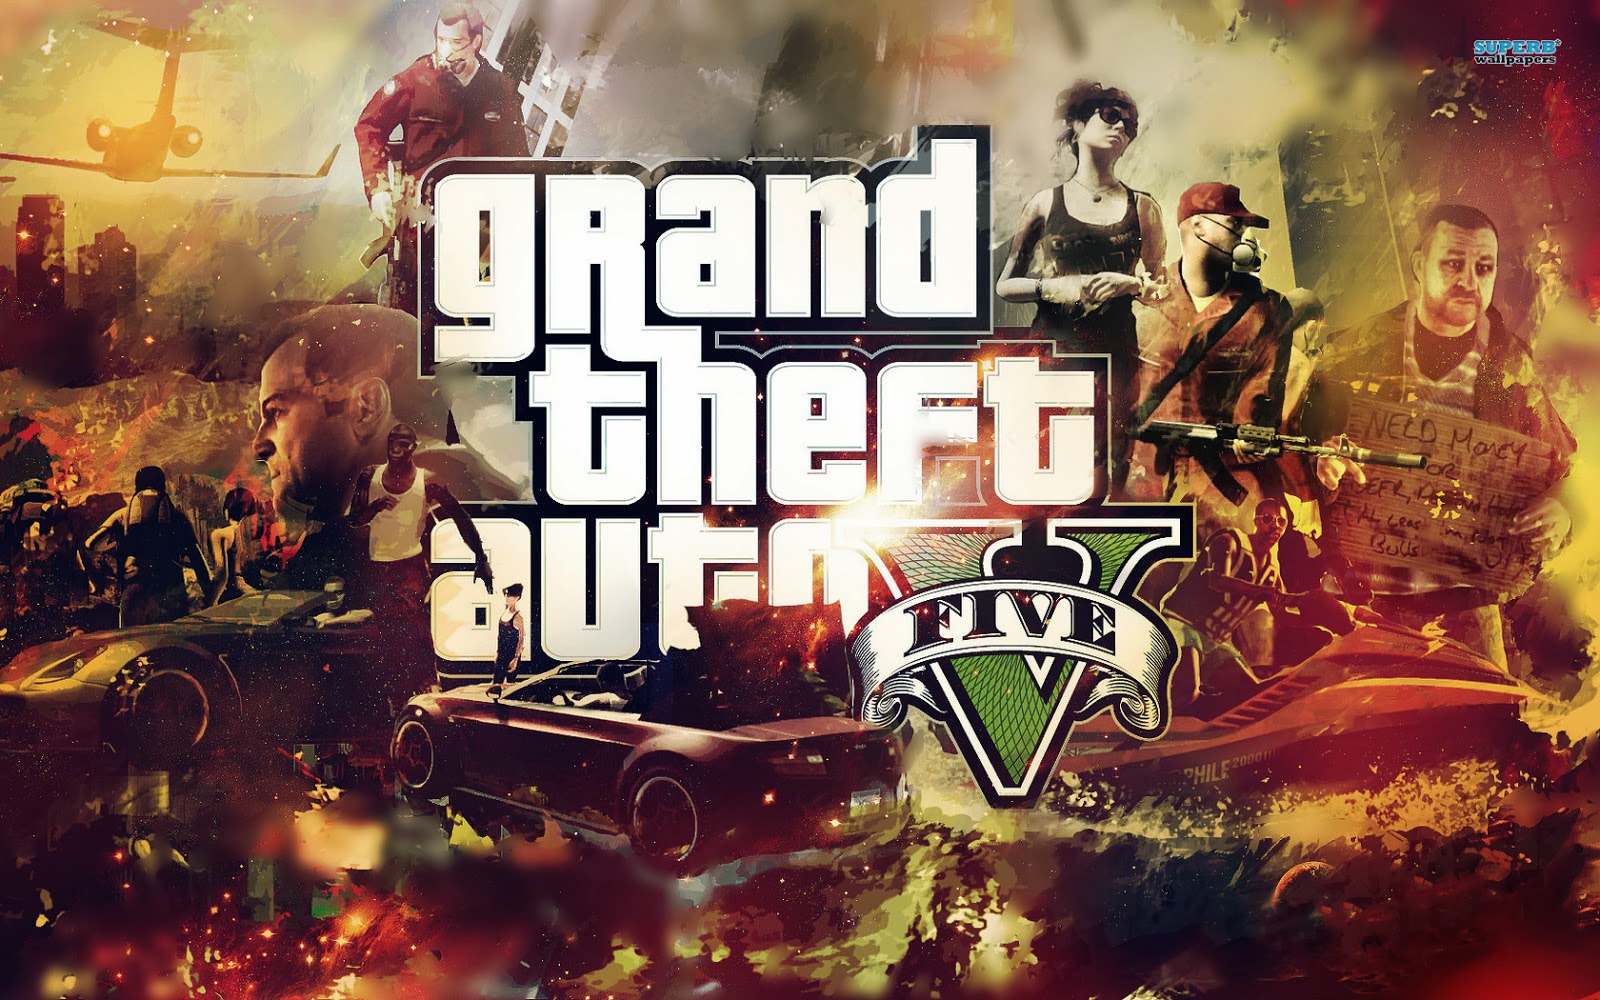  Background you can download this GTA V Wallpaper by Right Clicking